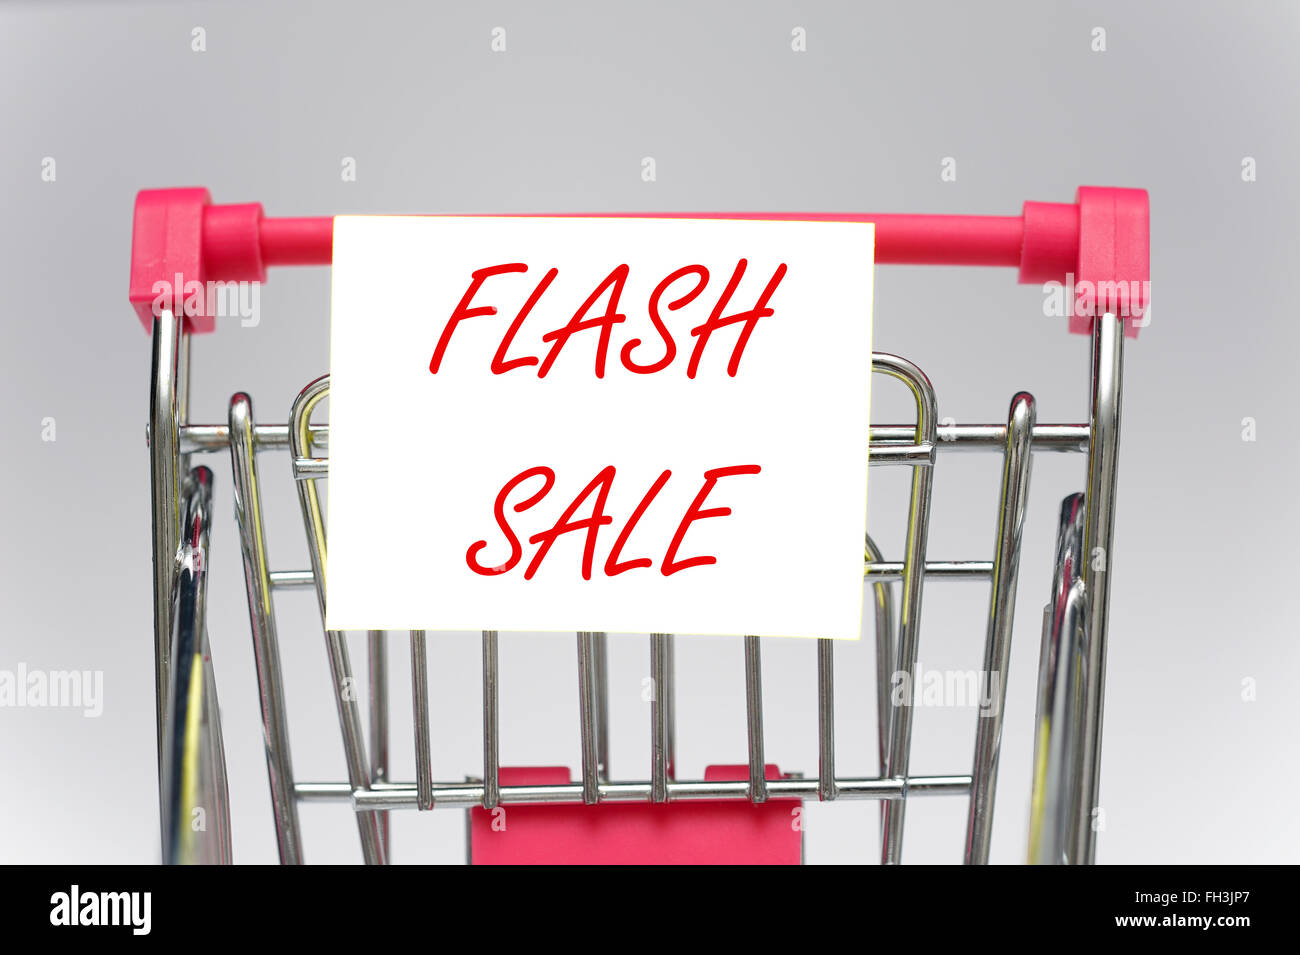 Flash sale on a supermarket shopping trolley Stock Photo